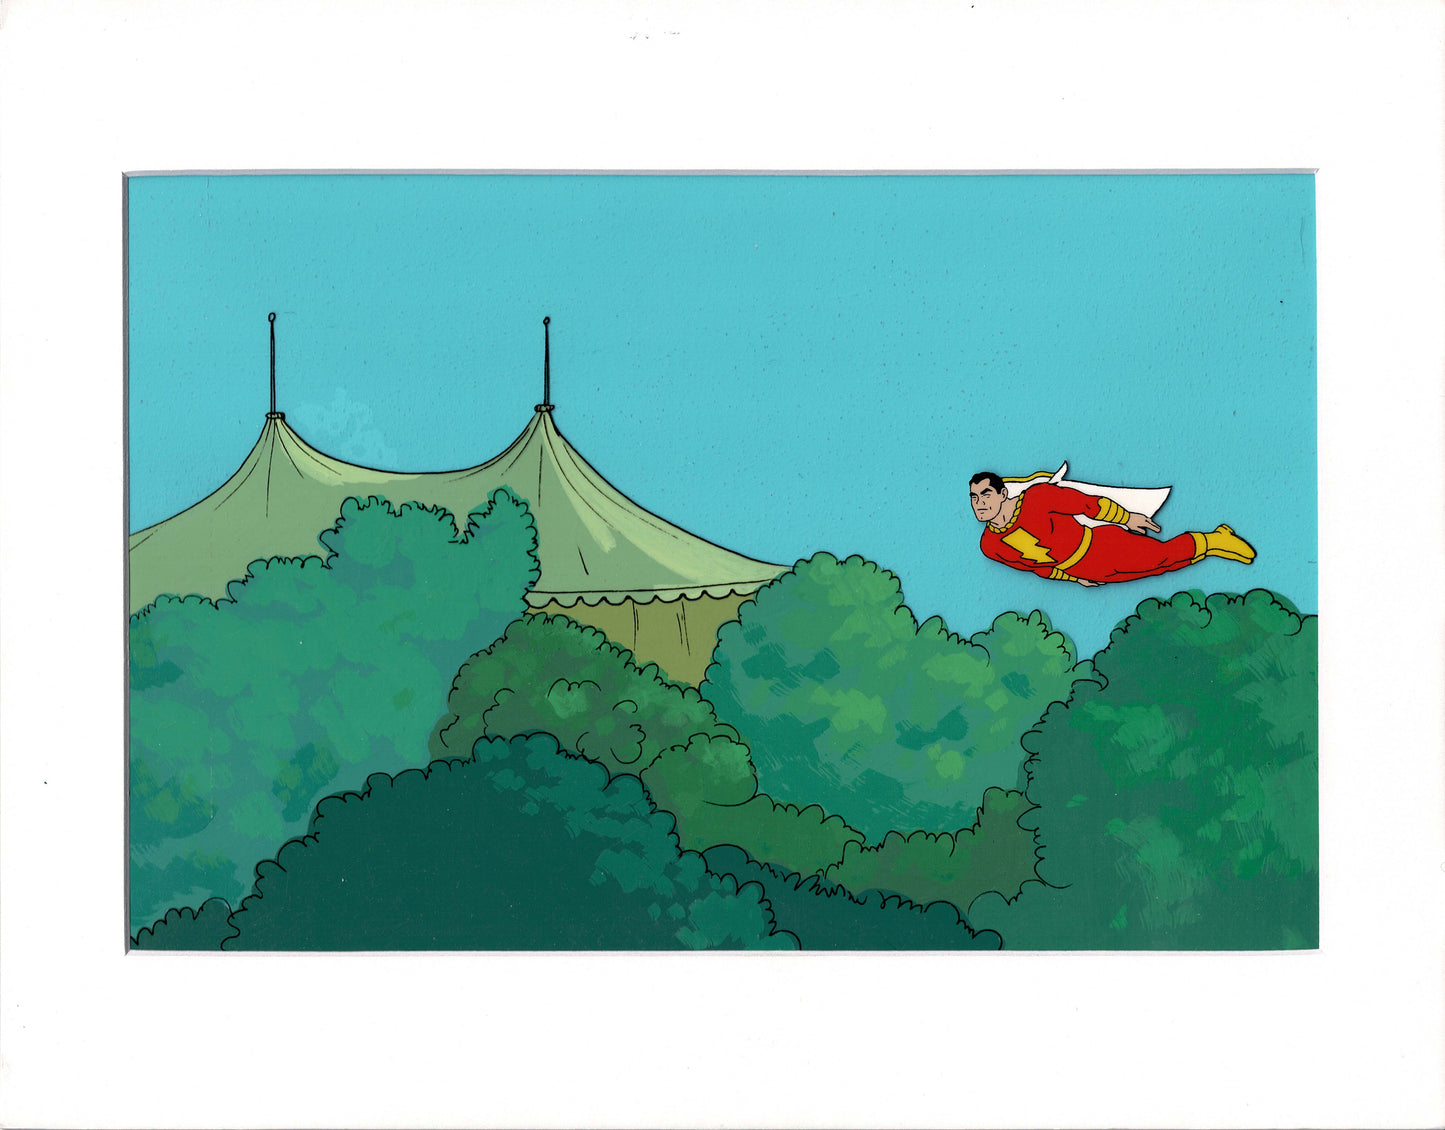 Shazam Marvel Stock Production Animation Cel and OBG Original Background from Filmation 1974-76 f